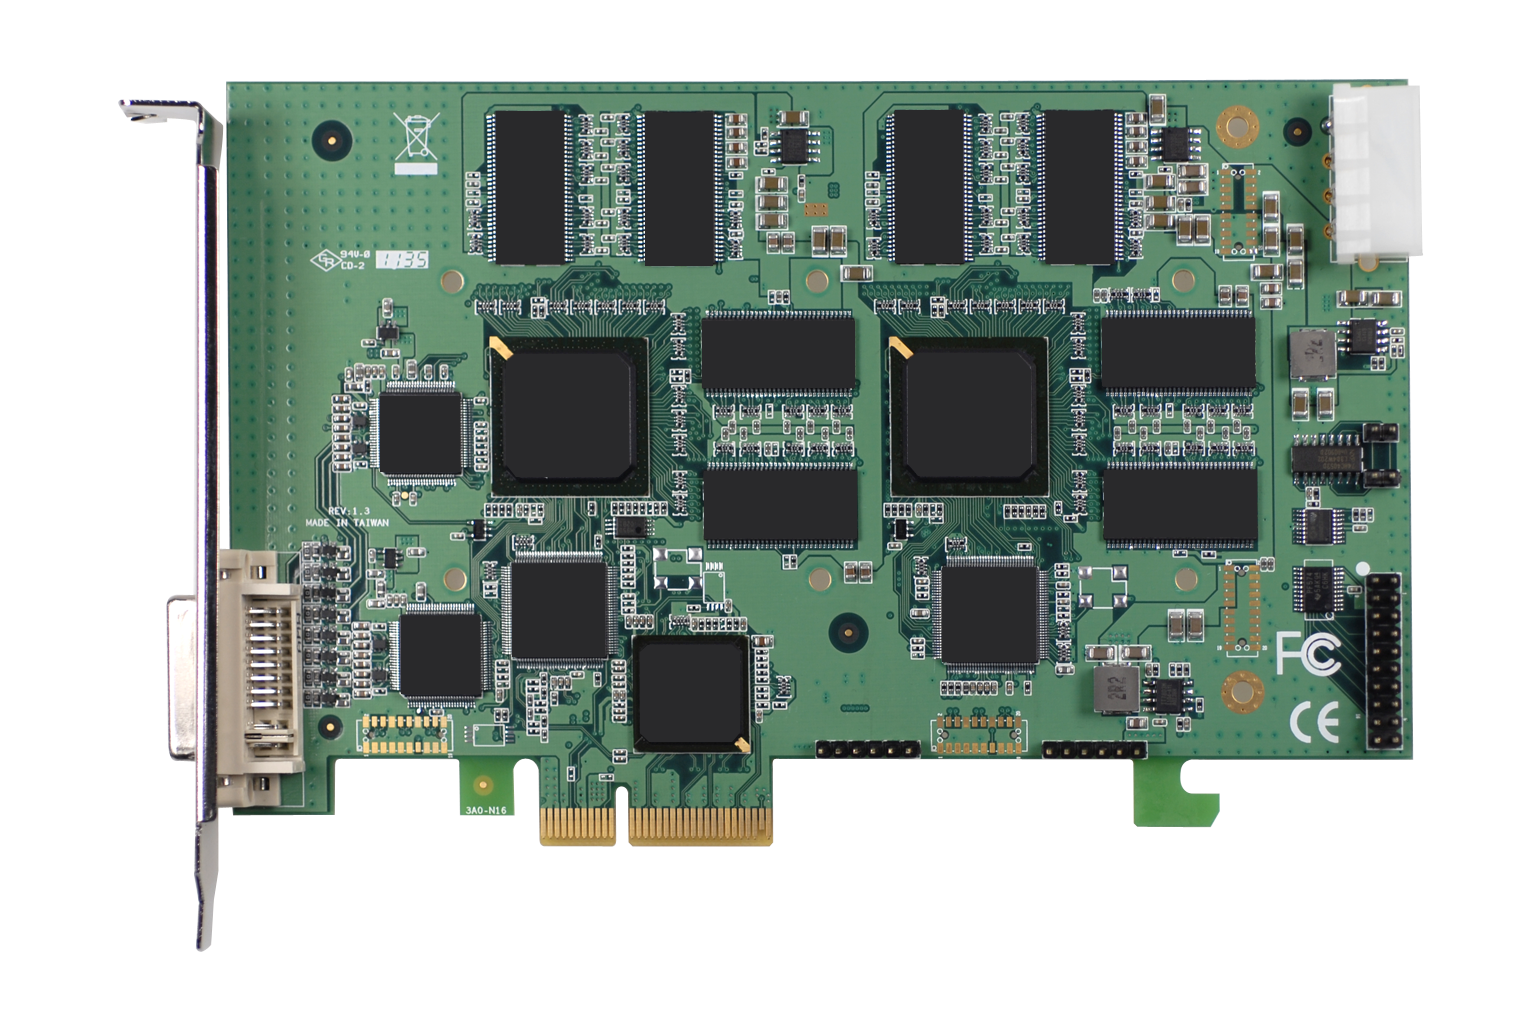 8-Channel SD PCIex4 HW Video Capture Card with SDK